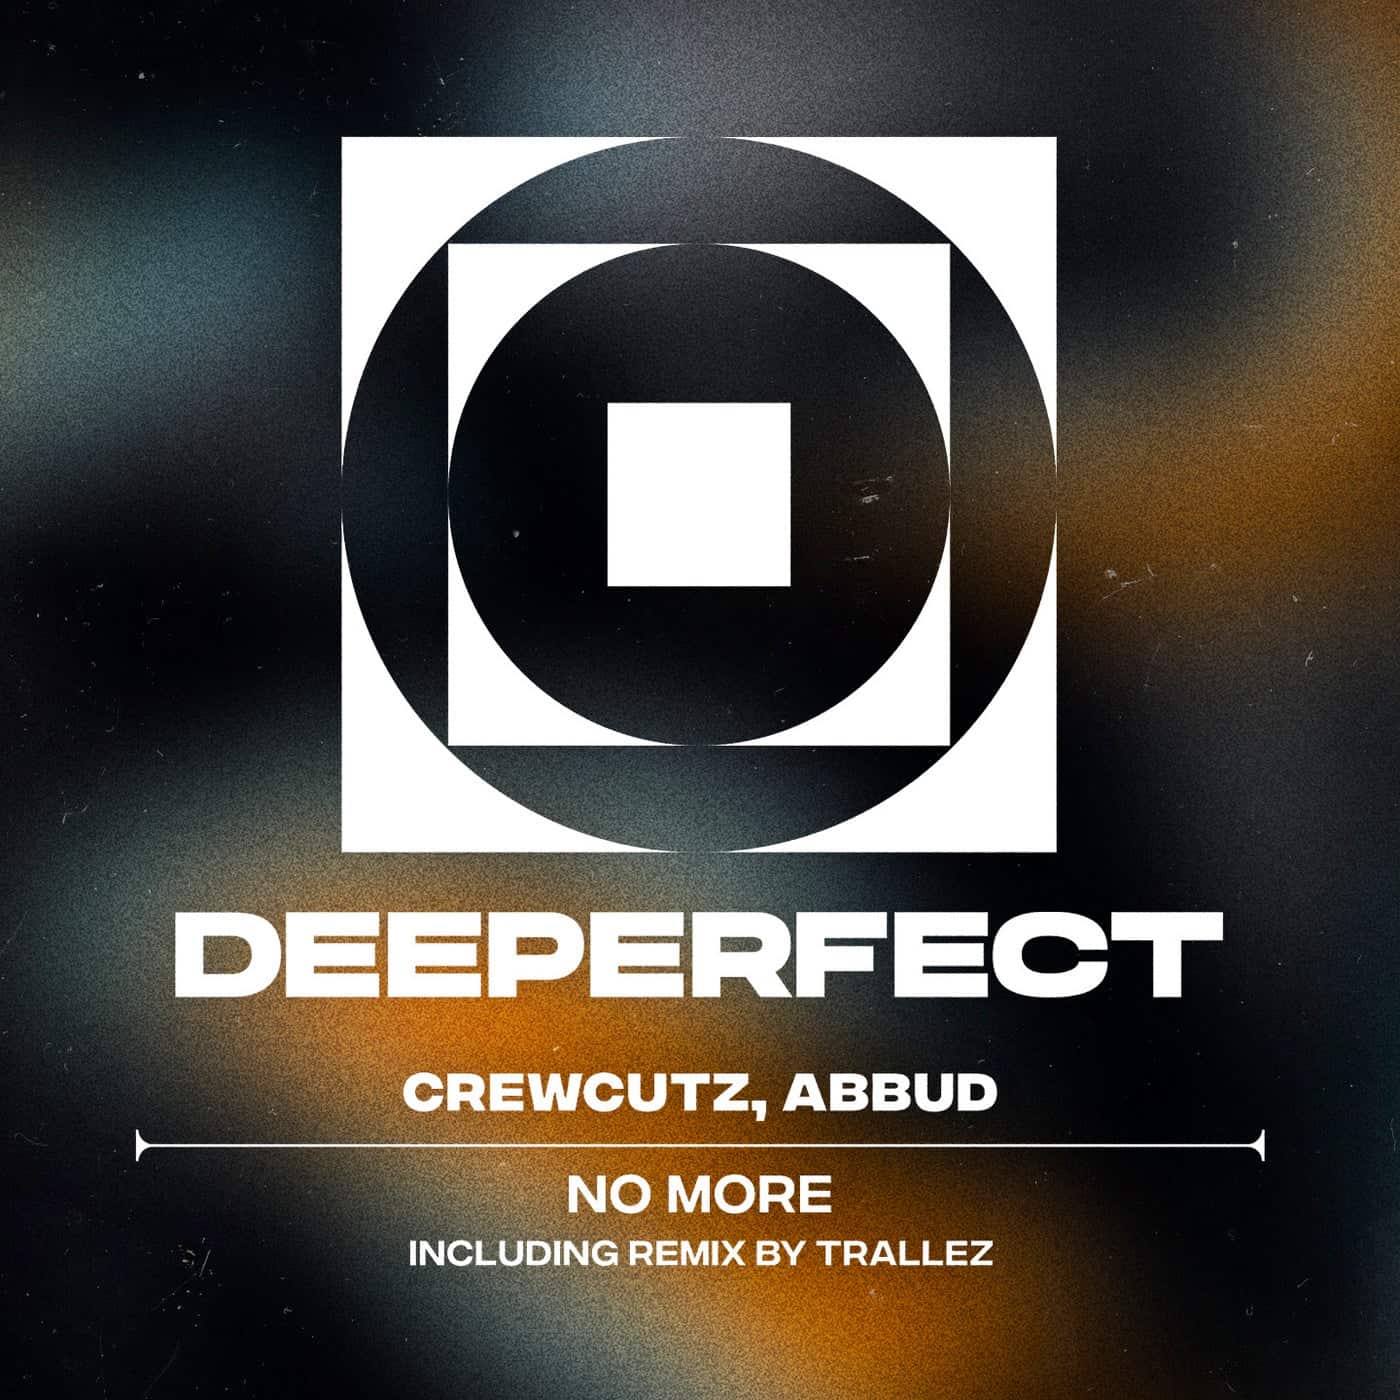 image cover: Abbud, Crewcutz - No More on Deeperfect